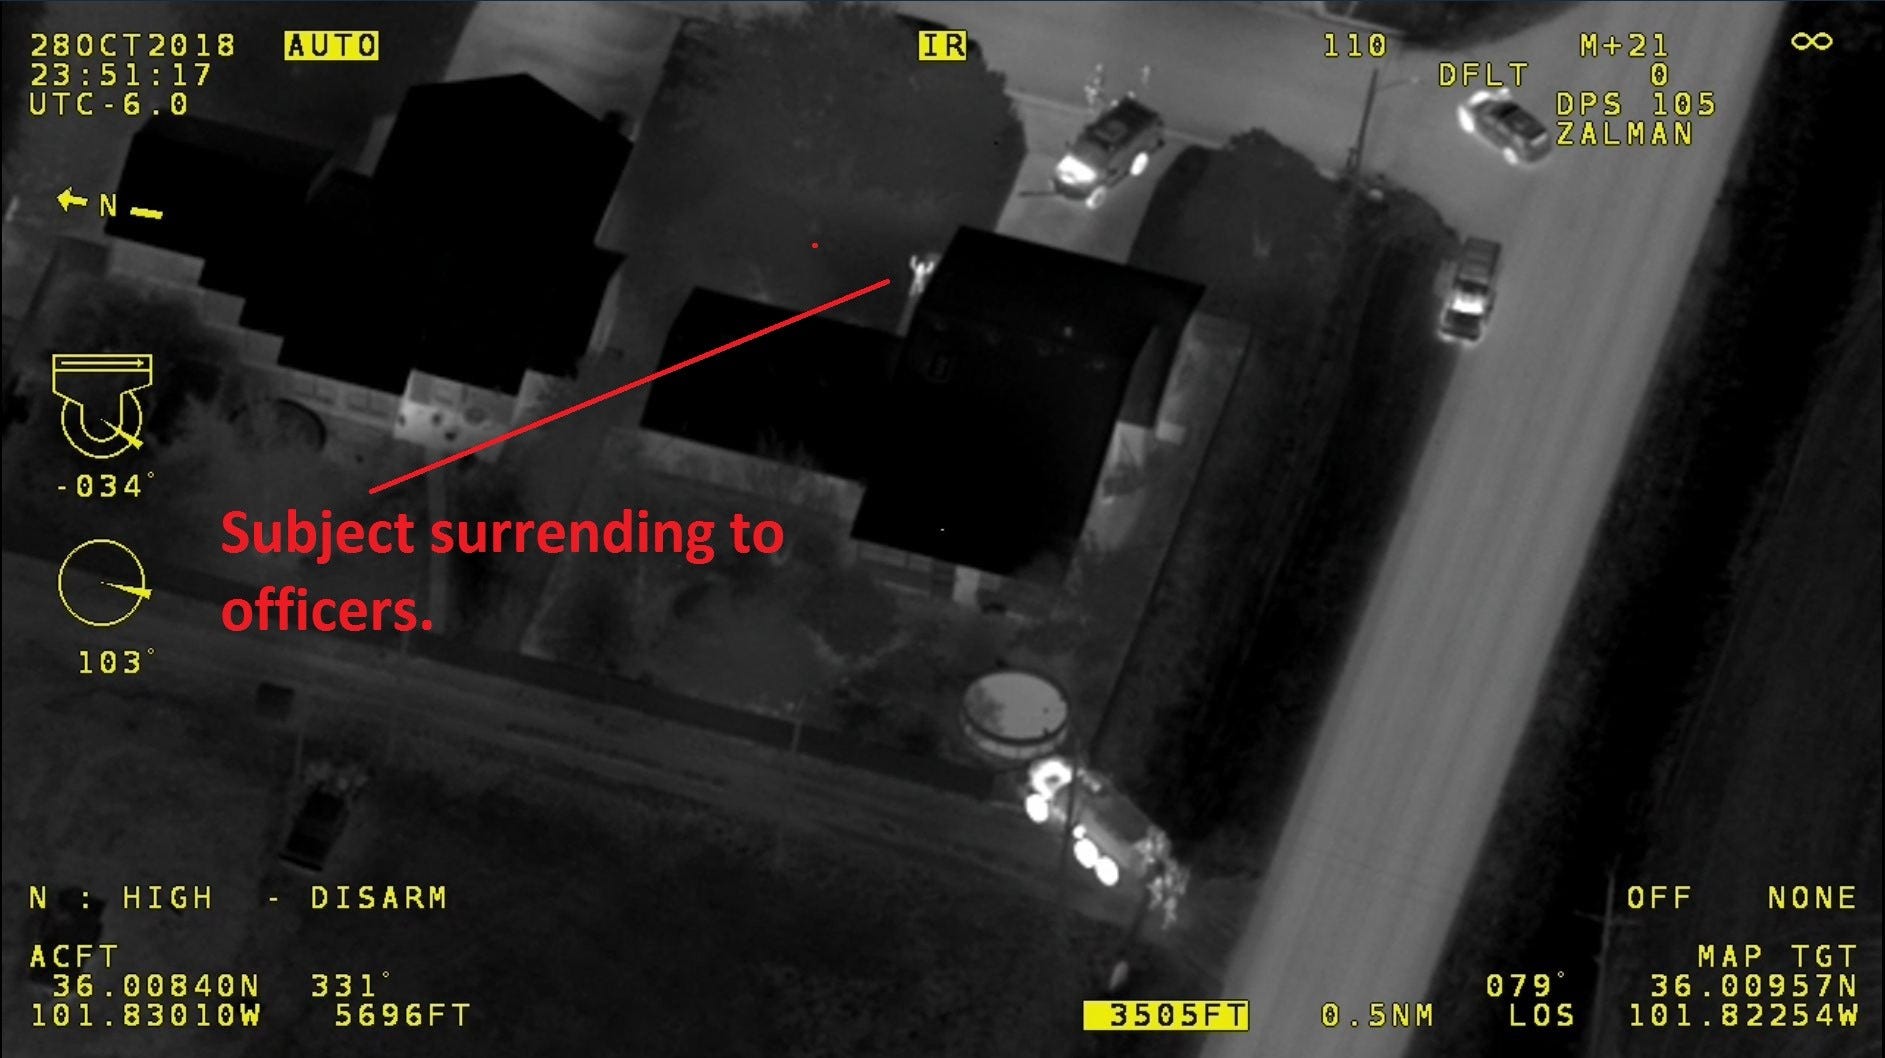 A drone photo shows how police arrested Tim Dean at his house in Sunray, Texas on Oct. 28, 2018. In this photo, Dean can be seen standing outside his house with his hands in the air, surrendering to officers.